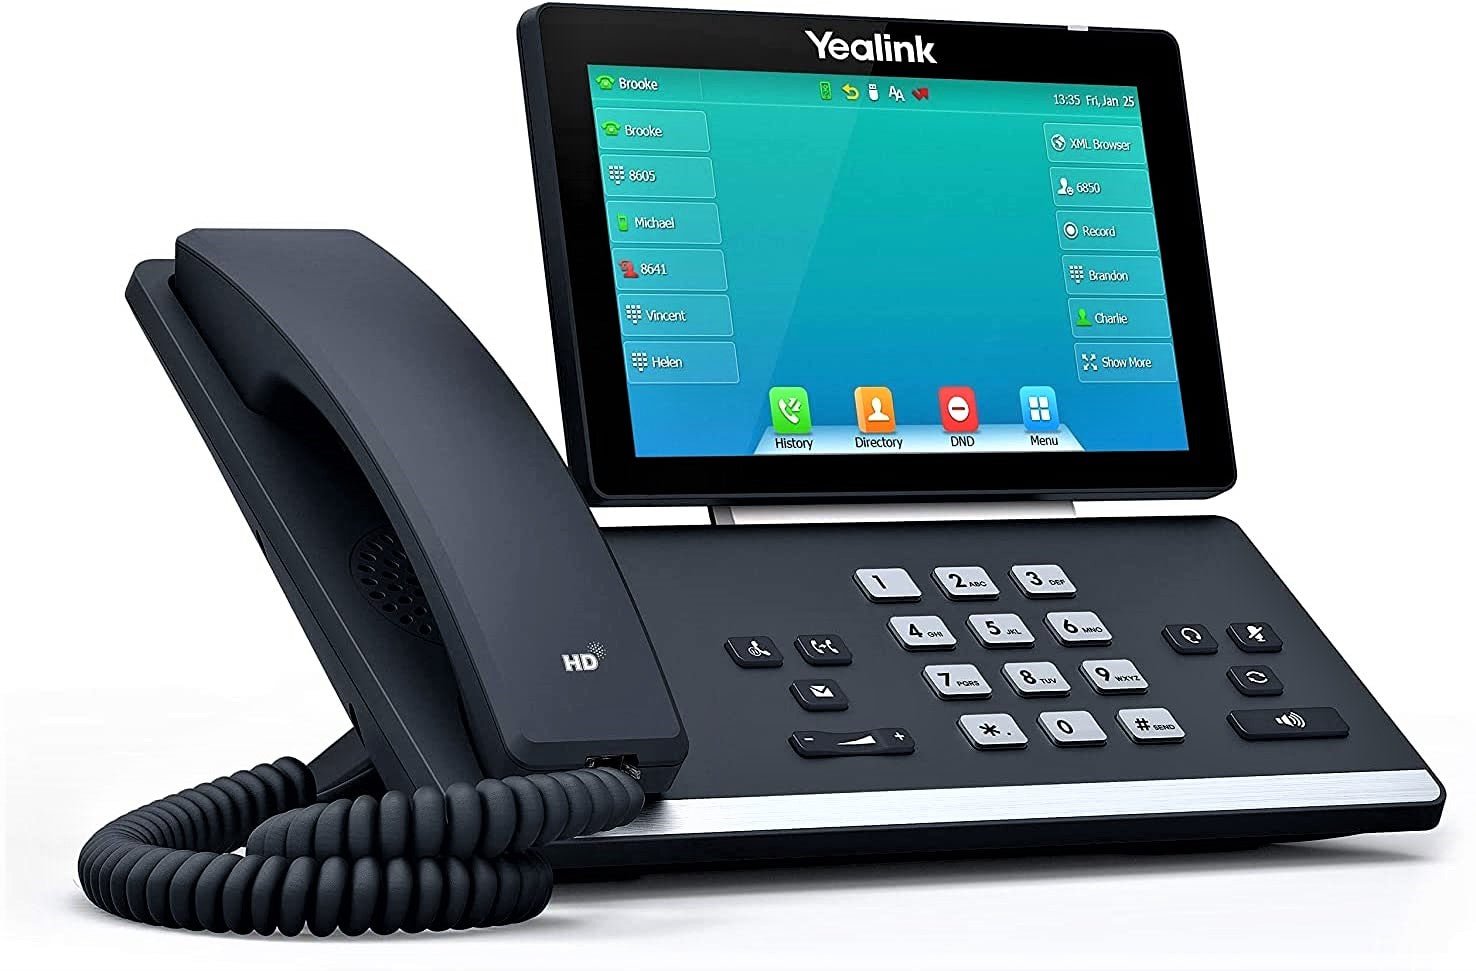 Yealink T57W IP Phone, 16 VoIP Accounts. 7-Inch Adjustable Color Touch Screen. USB 2.0, 802.11ac Wi-Fi, Dual-Port Gigabit Ethernet, 802.3af PoE, Power Adapter Not Included (SIP-T57W)